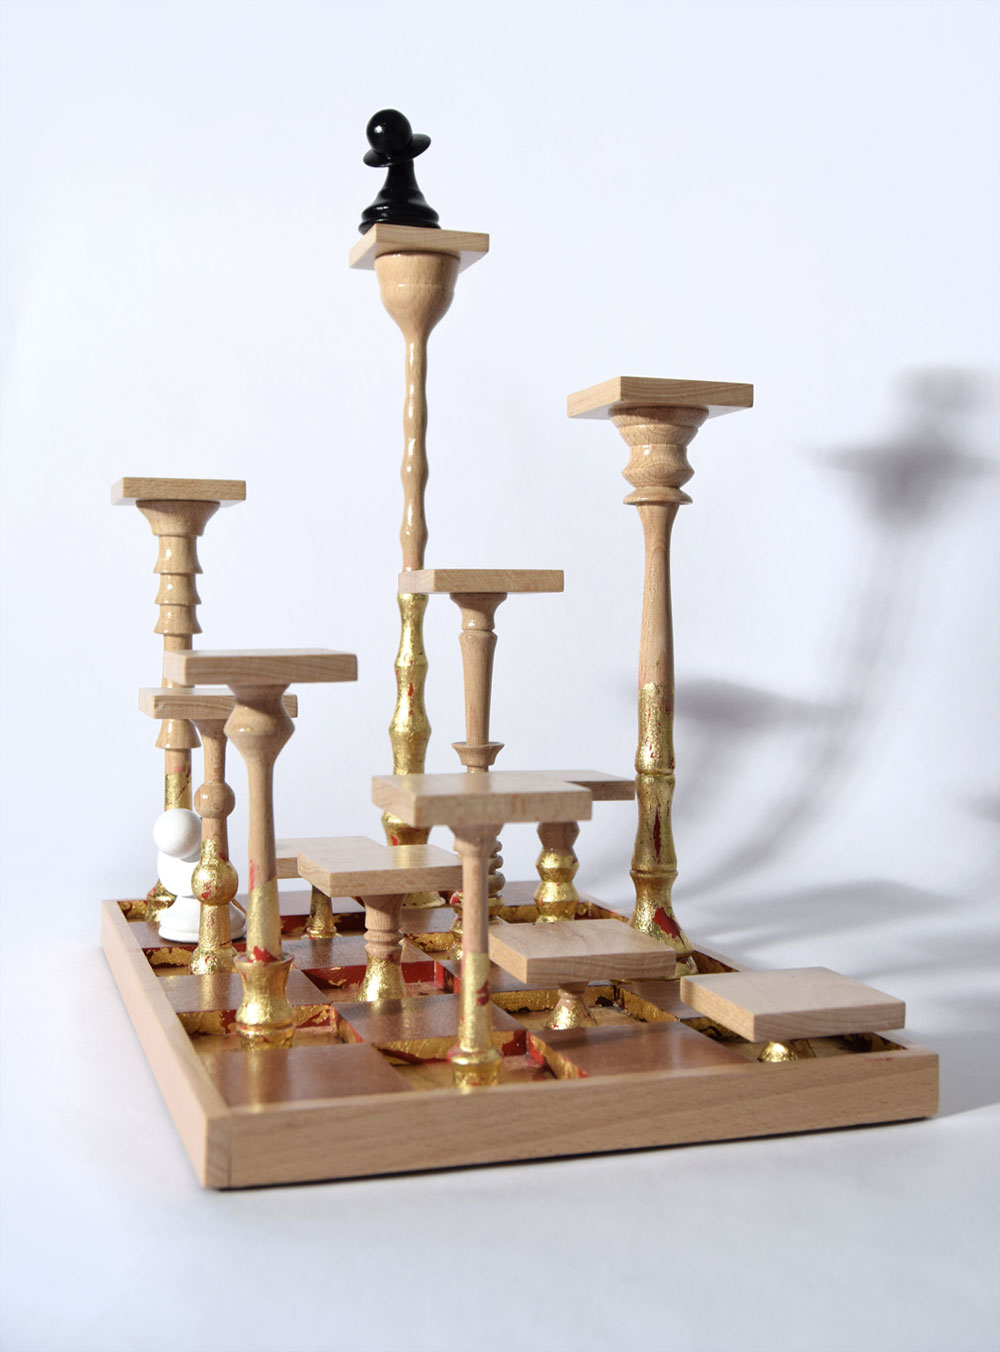 Wood sculputre based around chess entitled 